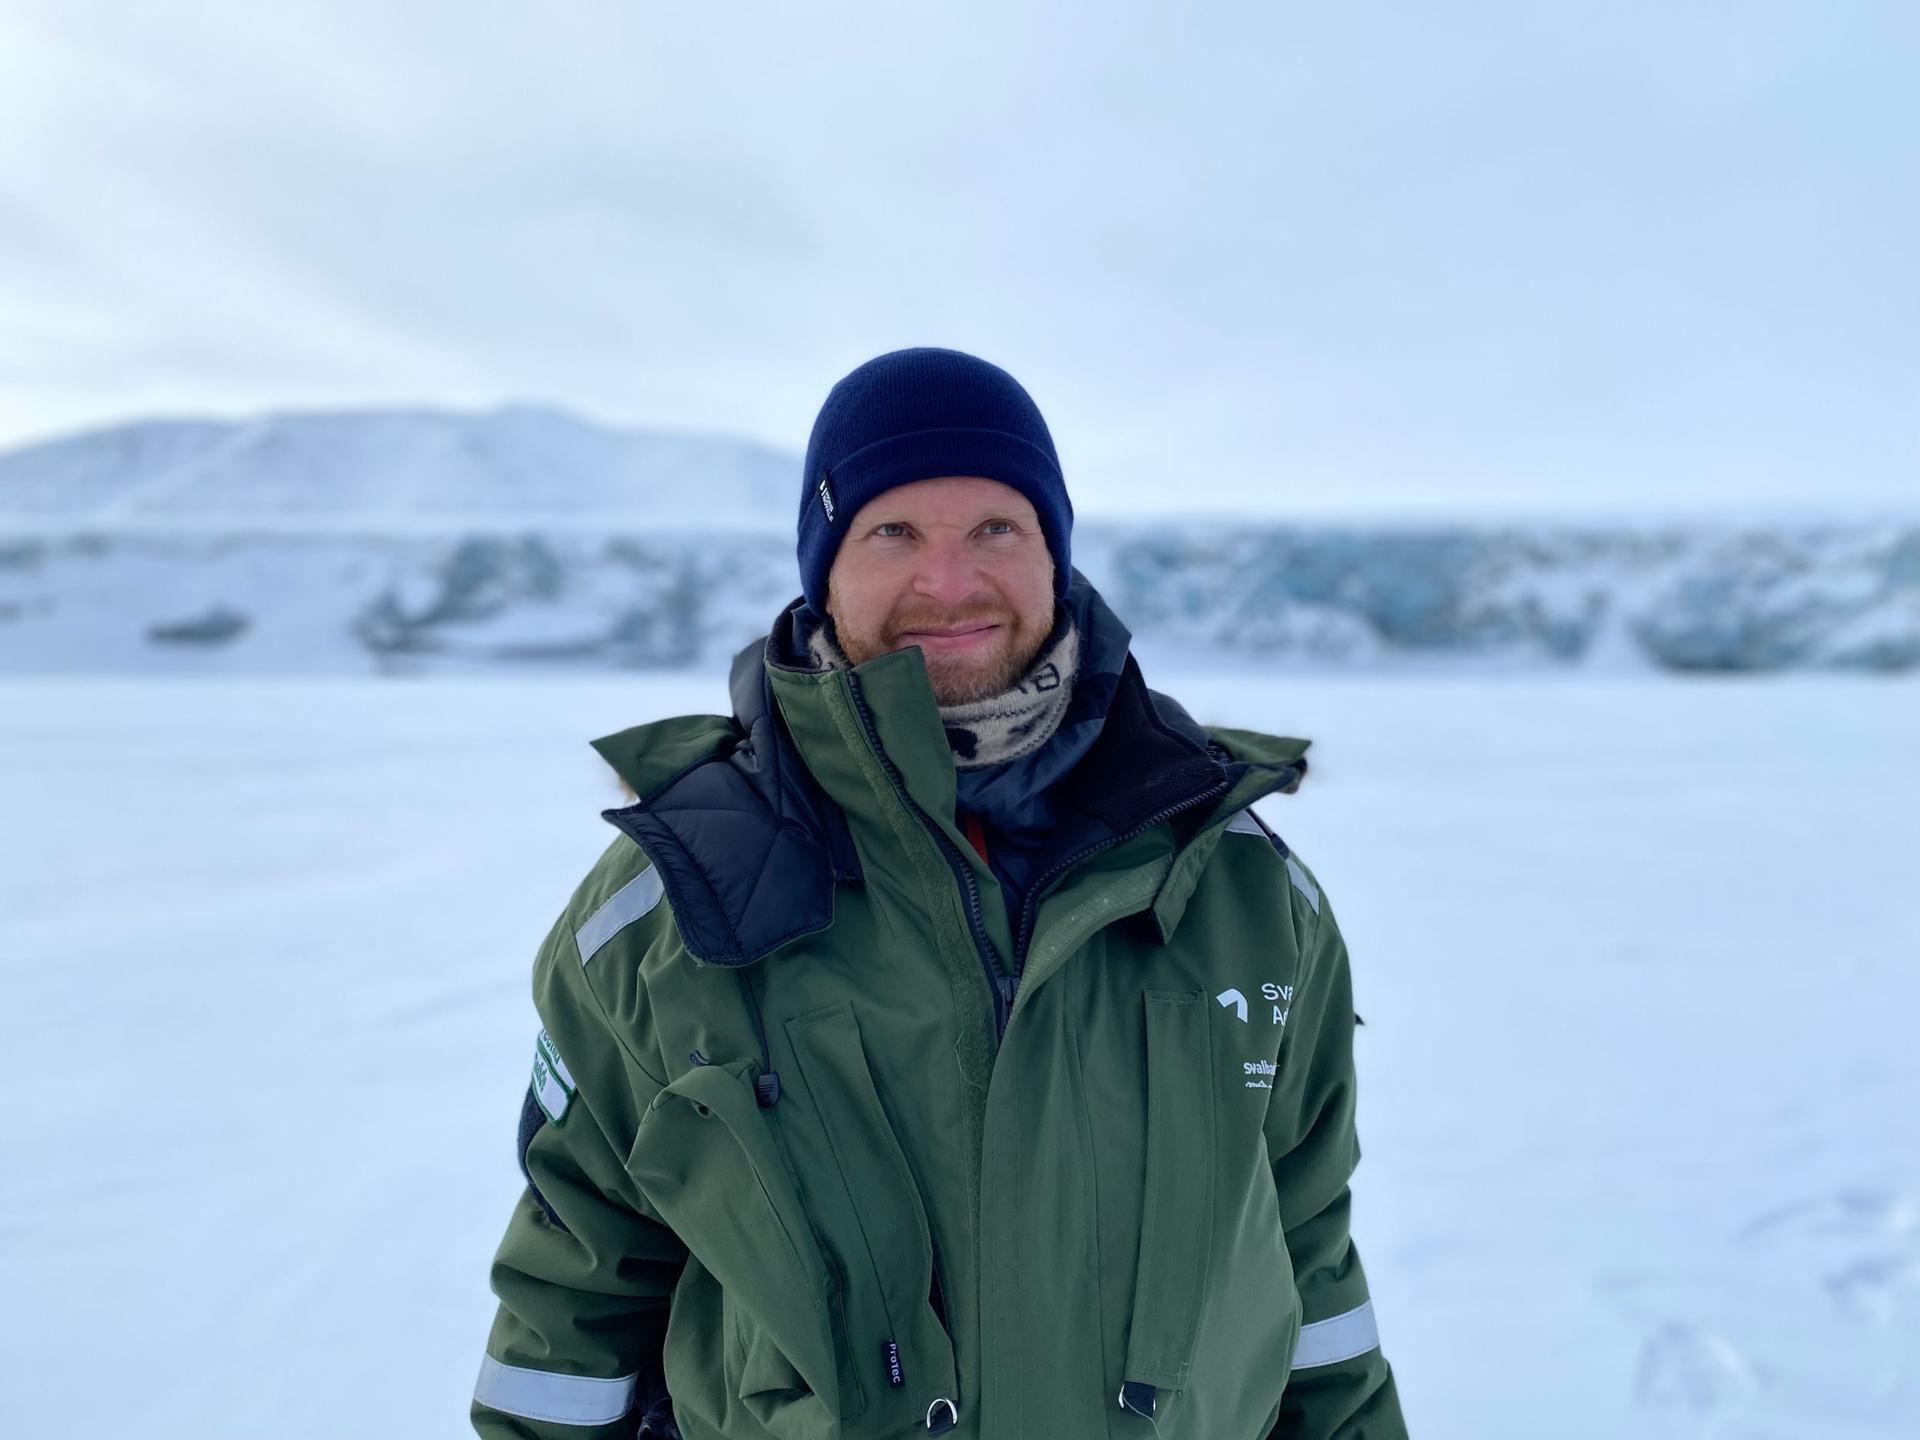 Teemu Tissari has lived in the Arctic archipelago of Svalbard since 2015. He works as a guide for Svalbard Adventures, where he leads snowmobile trips to the east coast of the largest island, Spitsbergen.